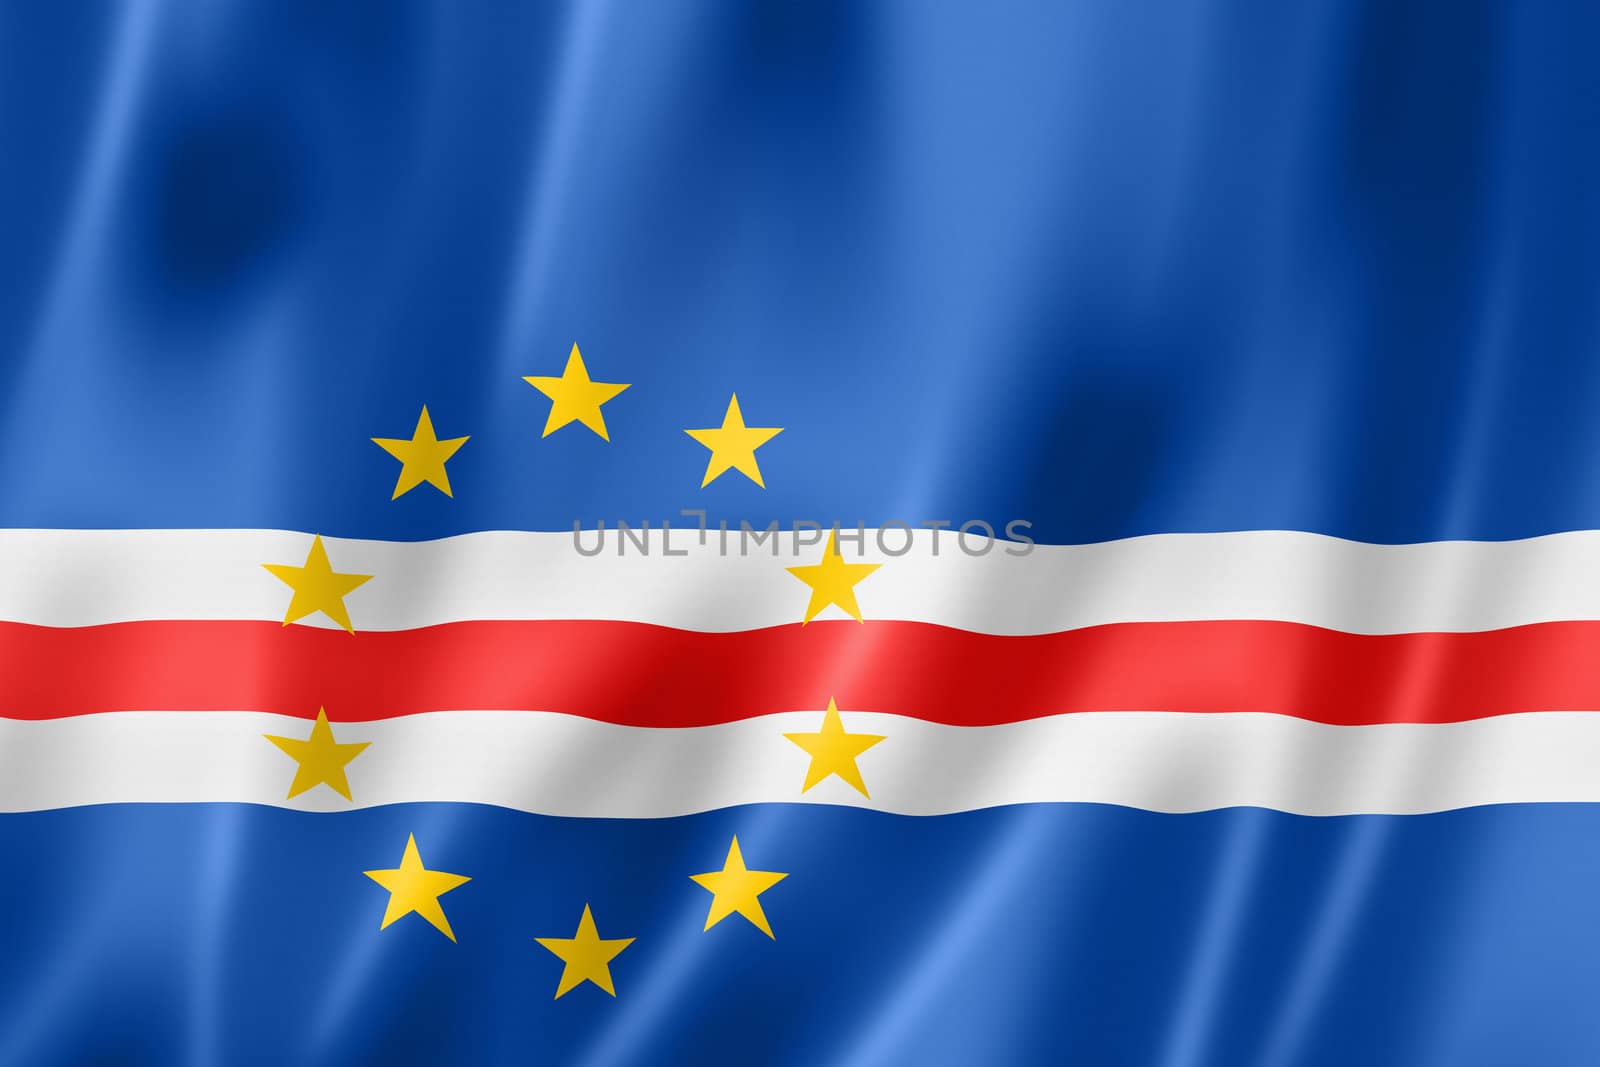 Cape Verde flag by daboost